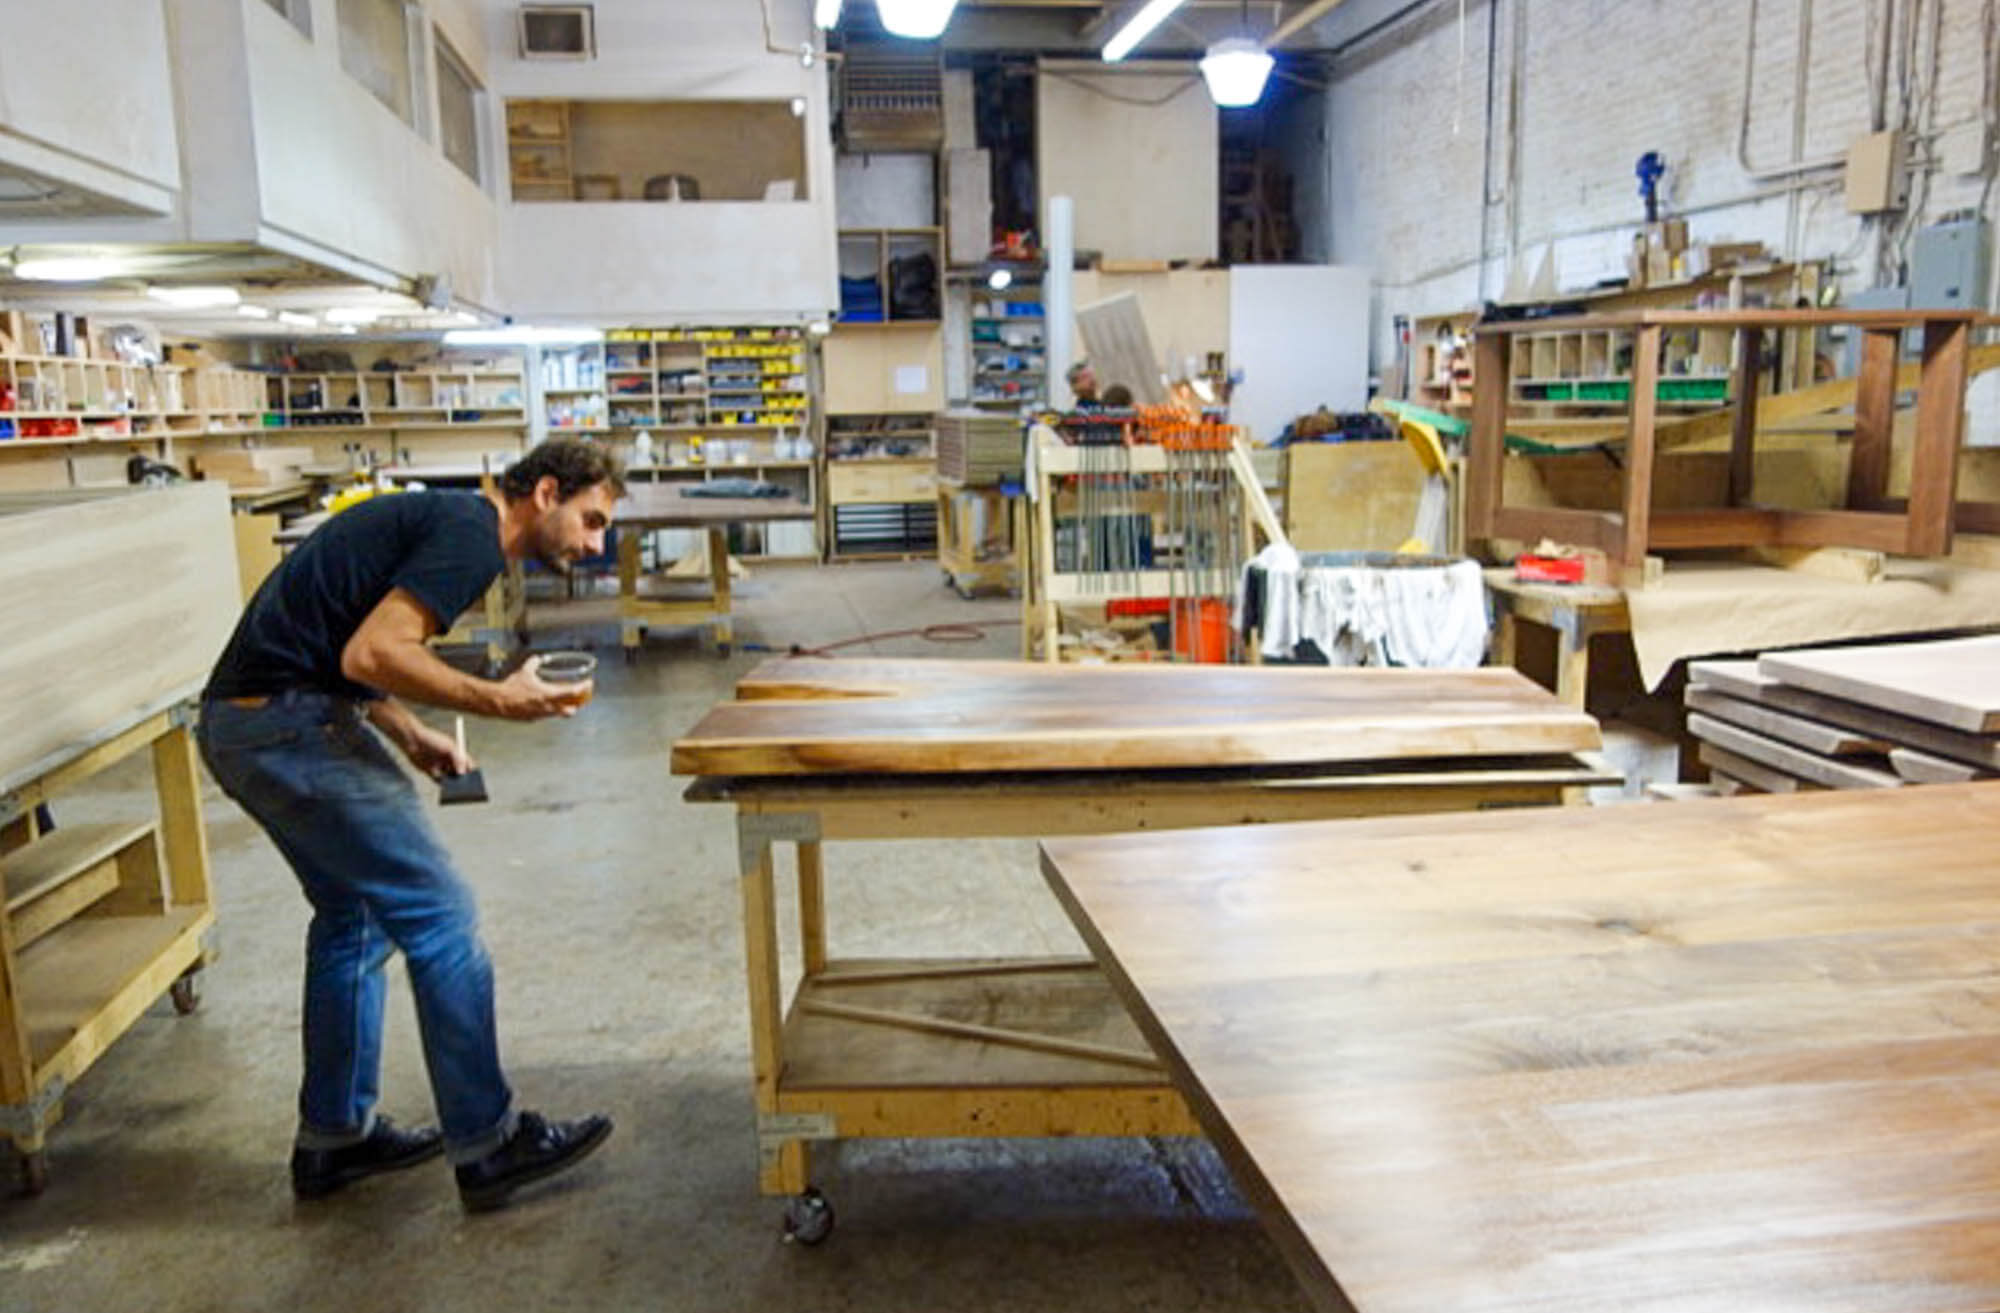 Live Edge Furniture Edges Out Recycled Wood As Status Symbol